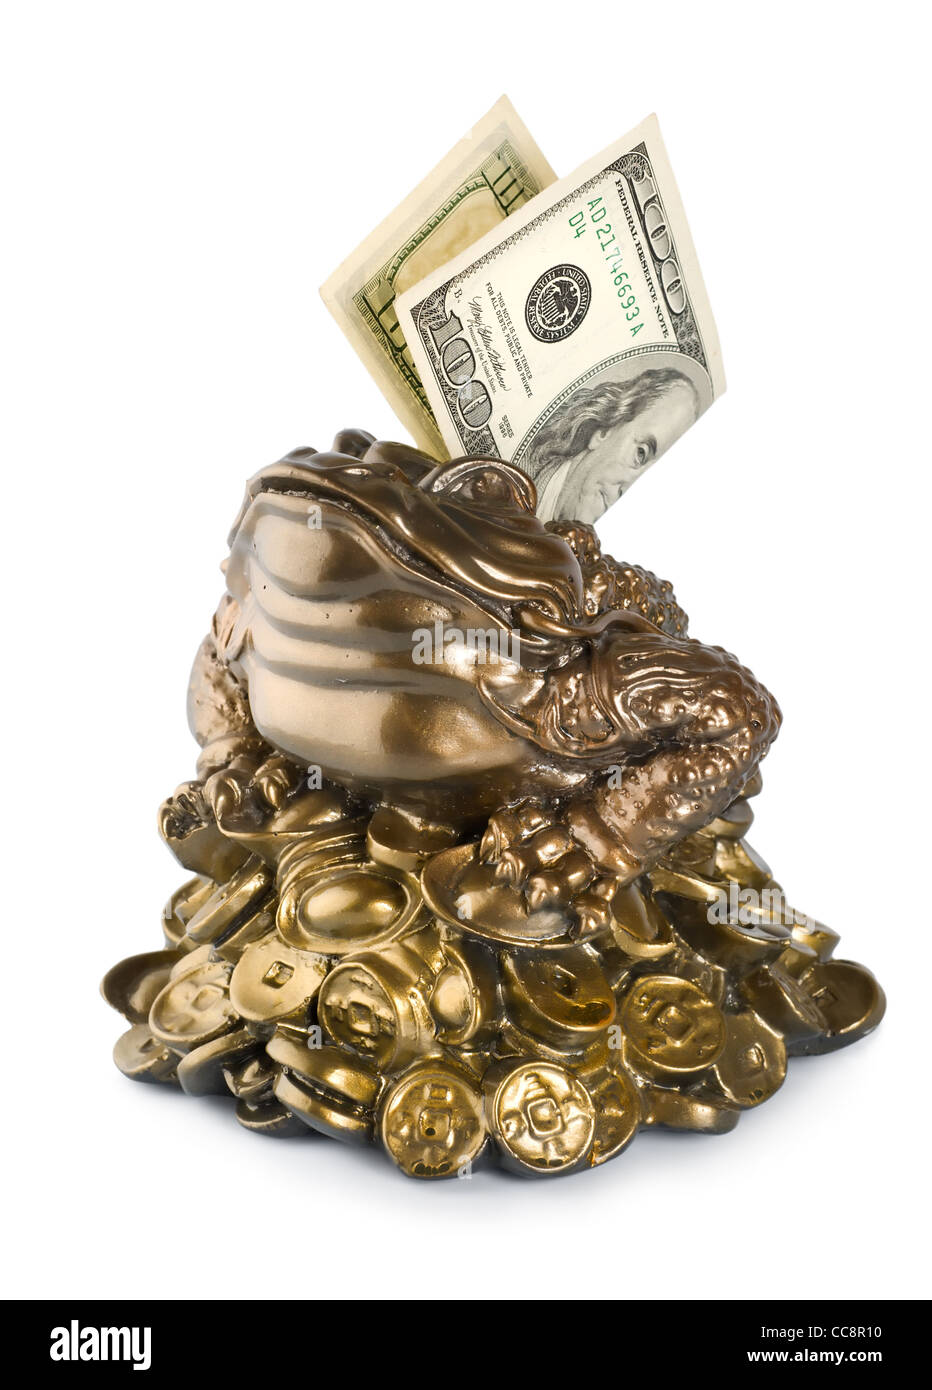 Moneybox frog isolated on a white background Stock Photo